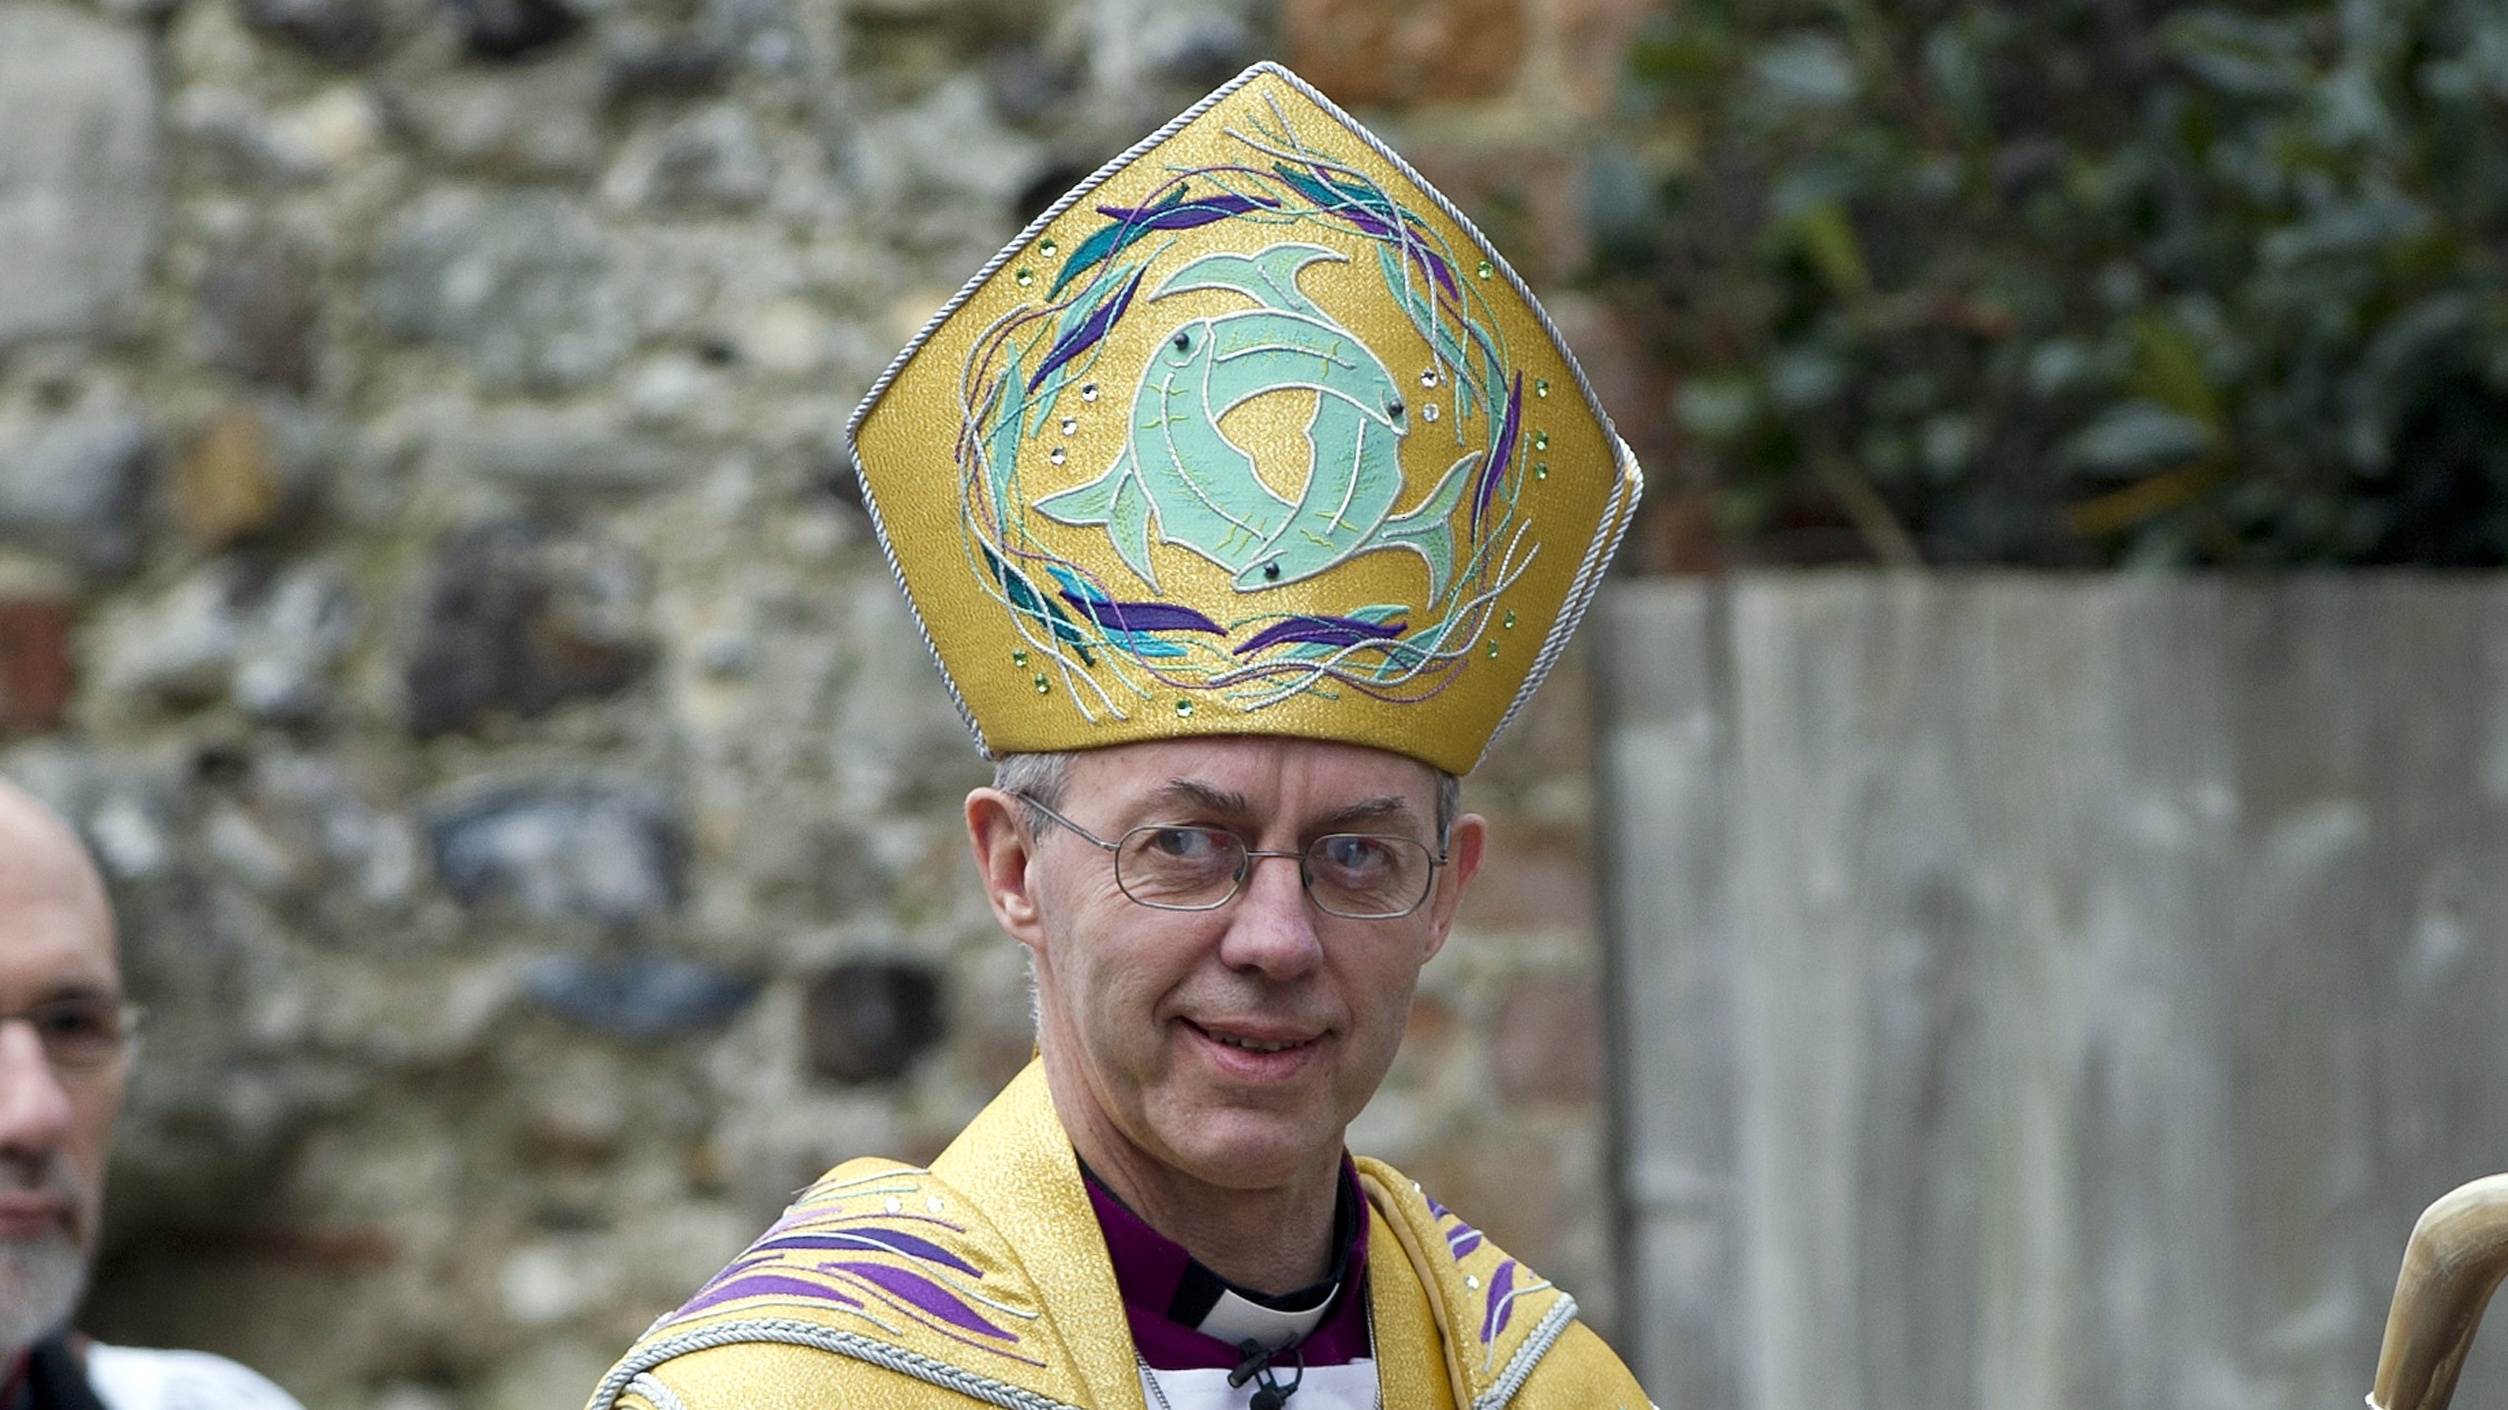 Justin Welby, the Archbishop of Canterbury 